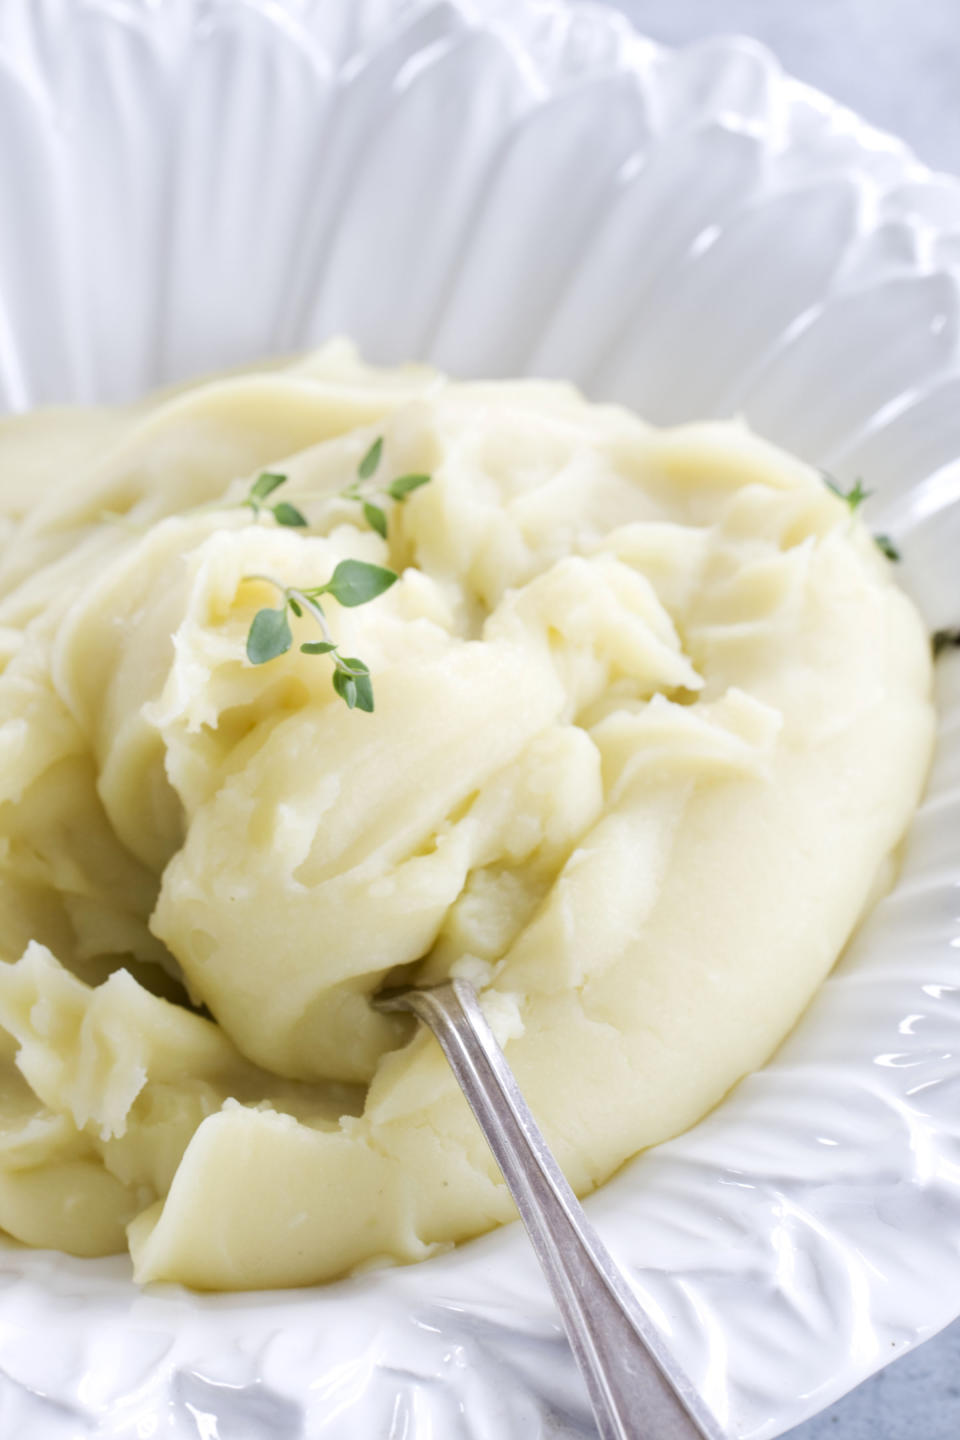 In this image taken on April 15, 2013, dairy-free modernist mashed potatoes are shown served on a plate in Concord, N.H. (AP Photo/Matthew Mead)